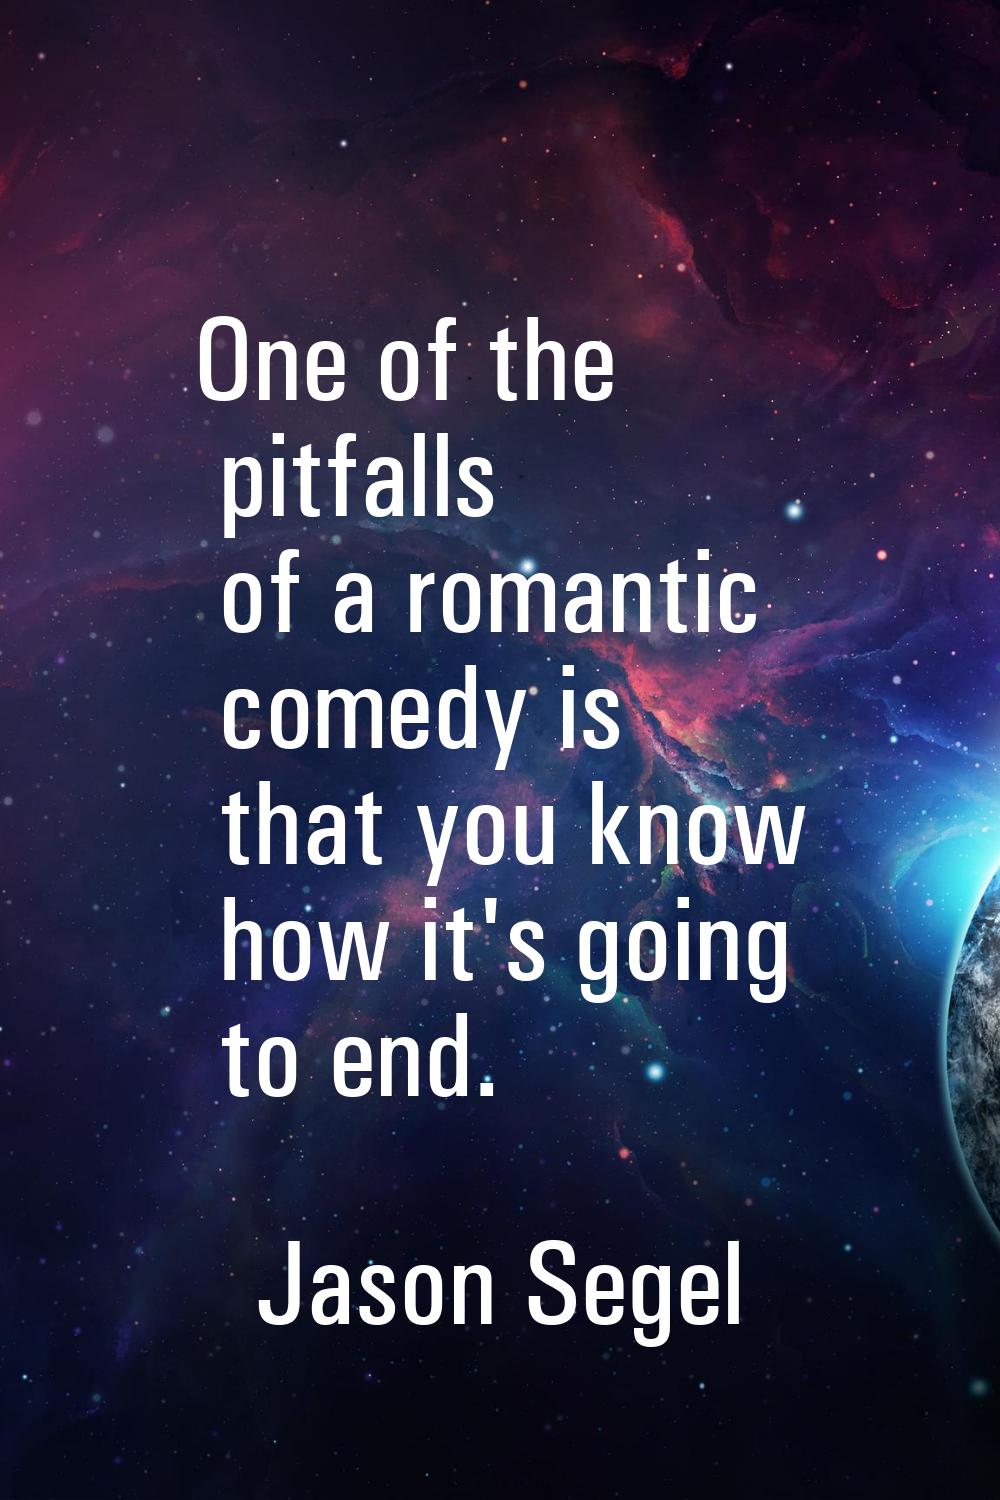 One of the pitfalls of a romantic comedy is that you know how it's going to end.